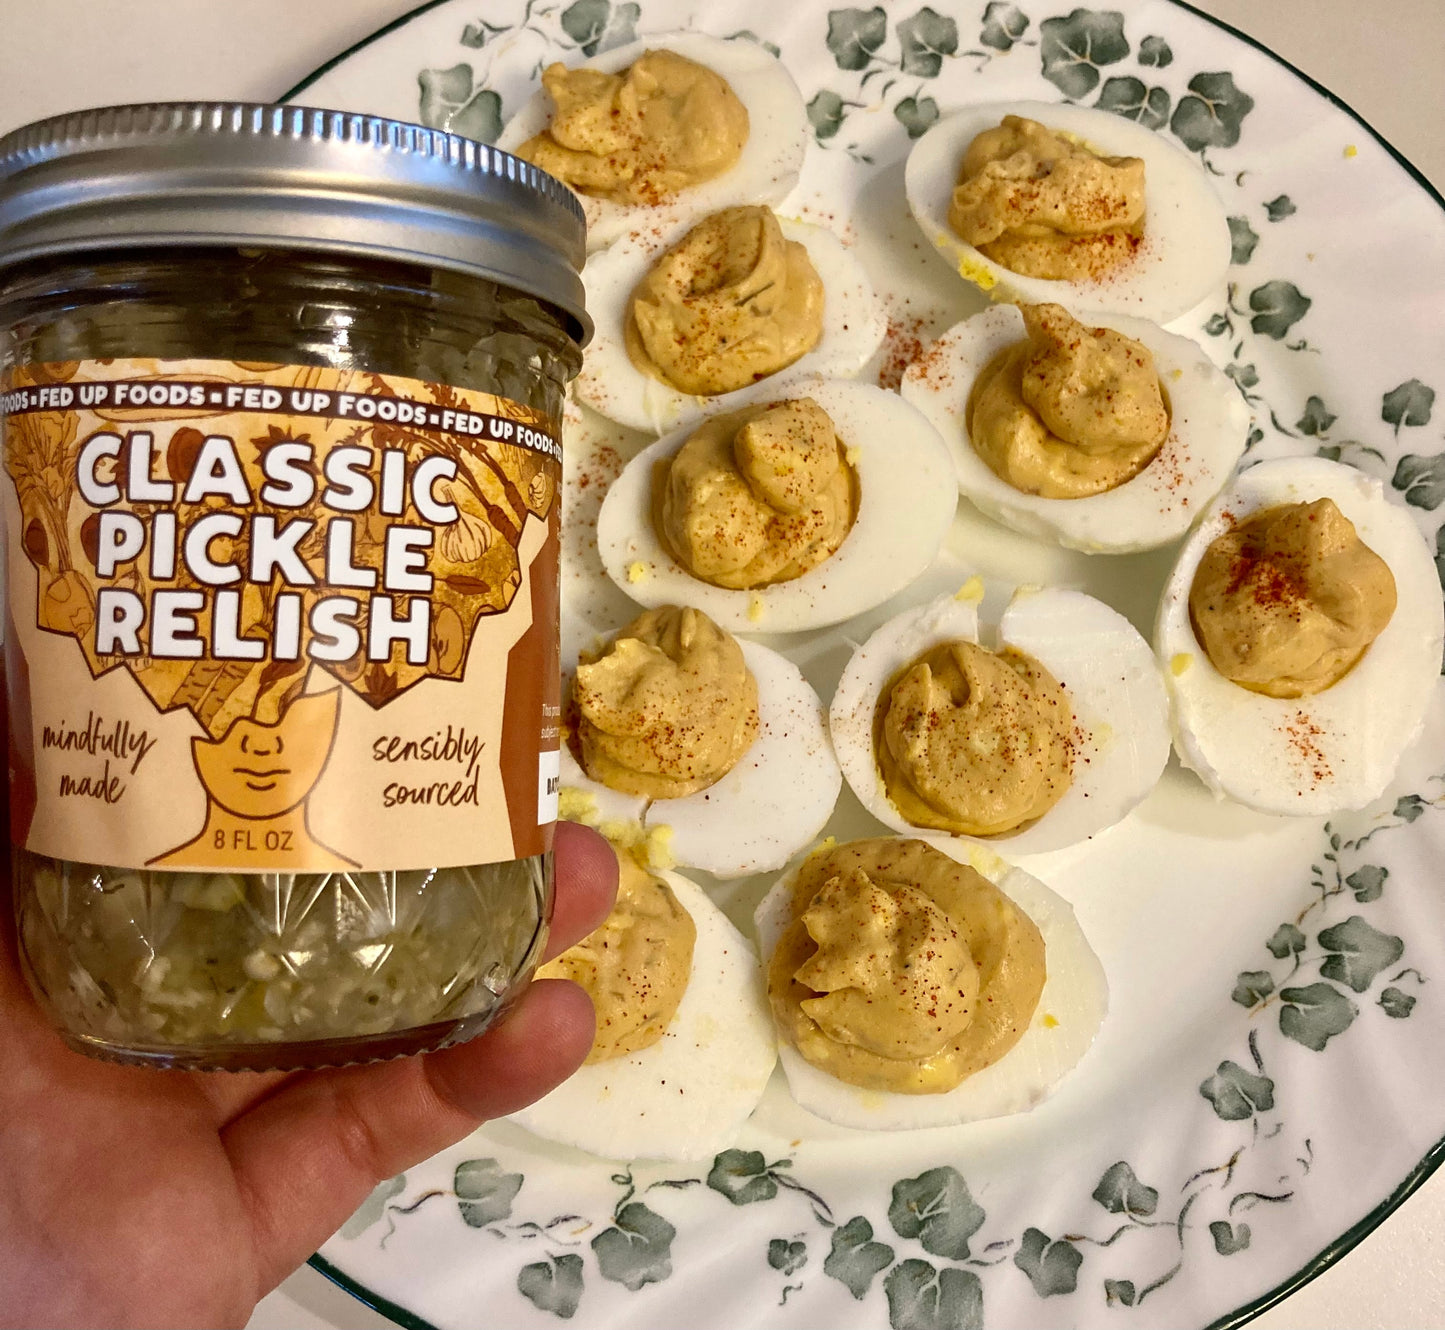 Classic Pickle Relish from Fed Up Foods in Deviled eggs